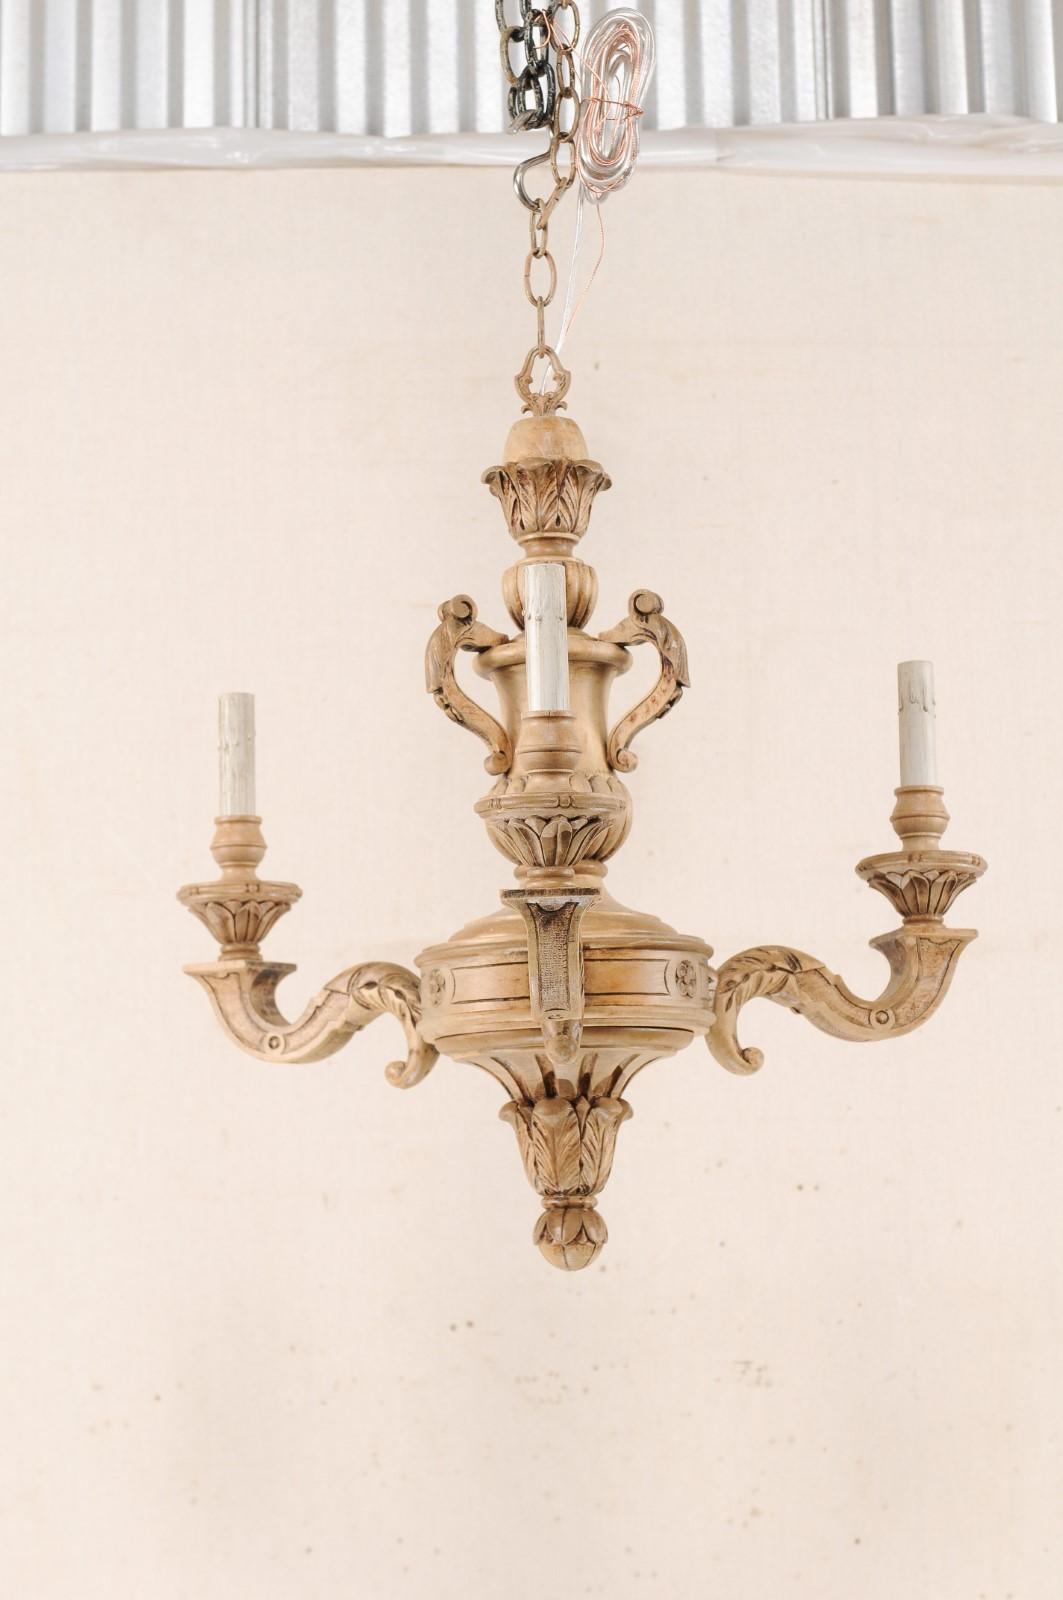 A French three-light shapely carved natural wood chandelier from the mid-20th century. This vintage chandelier from France features an ornately decorated central gallery with an urn-shaped carving, with pierced handles, atop the more bulbous mid